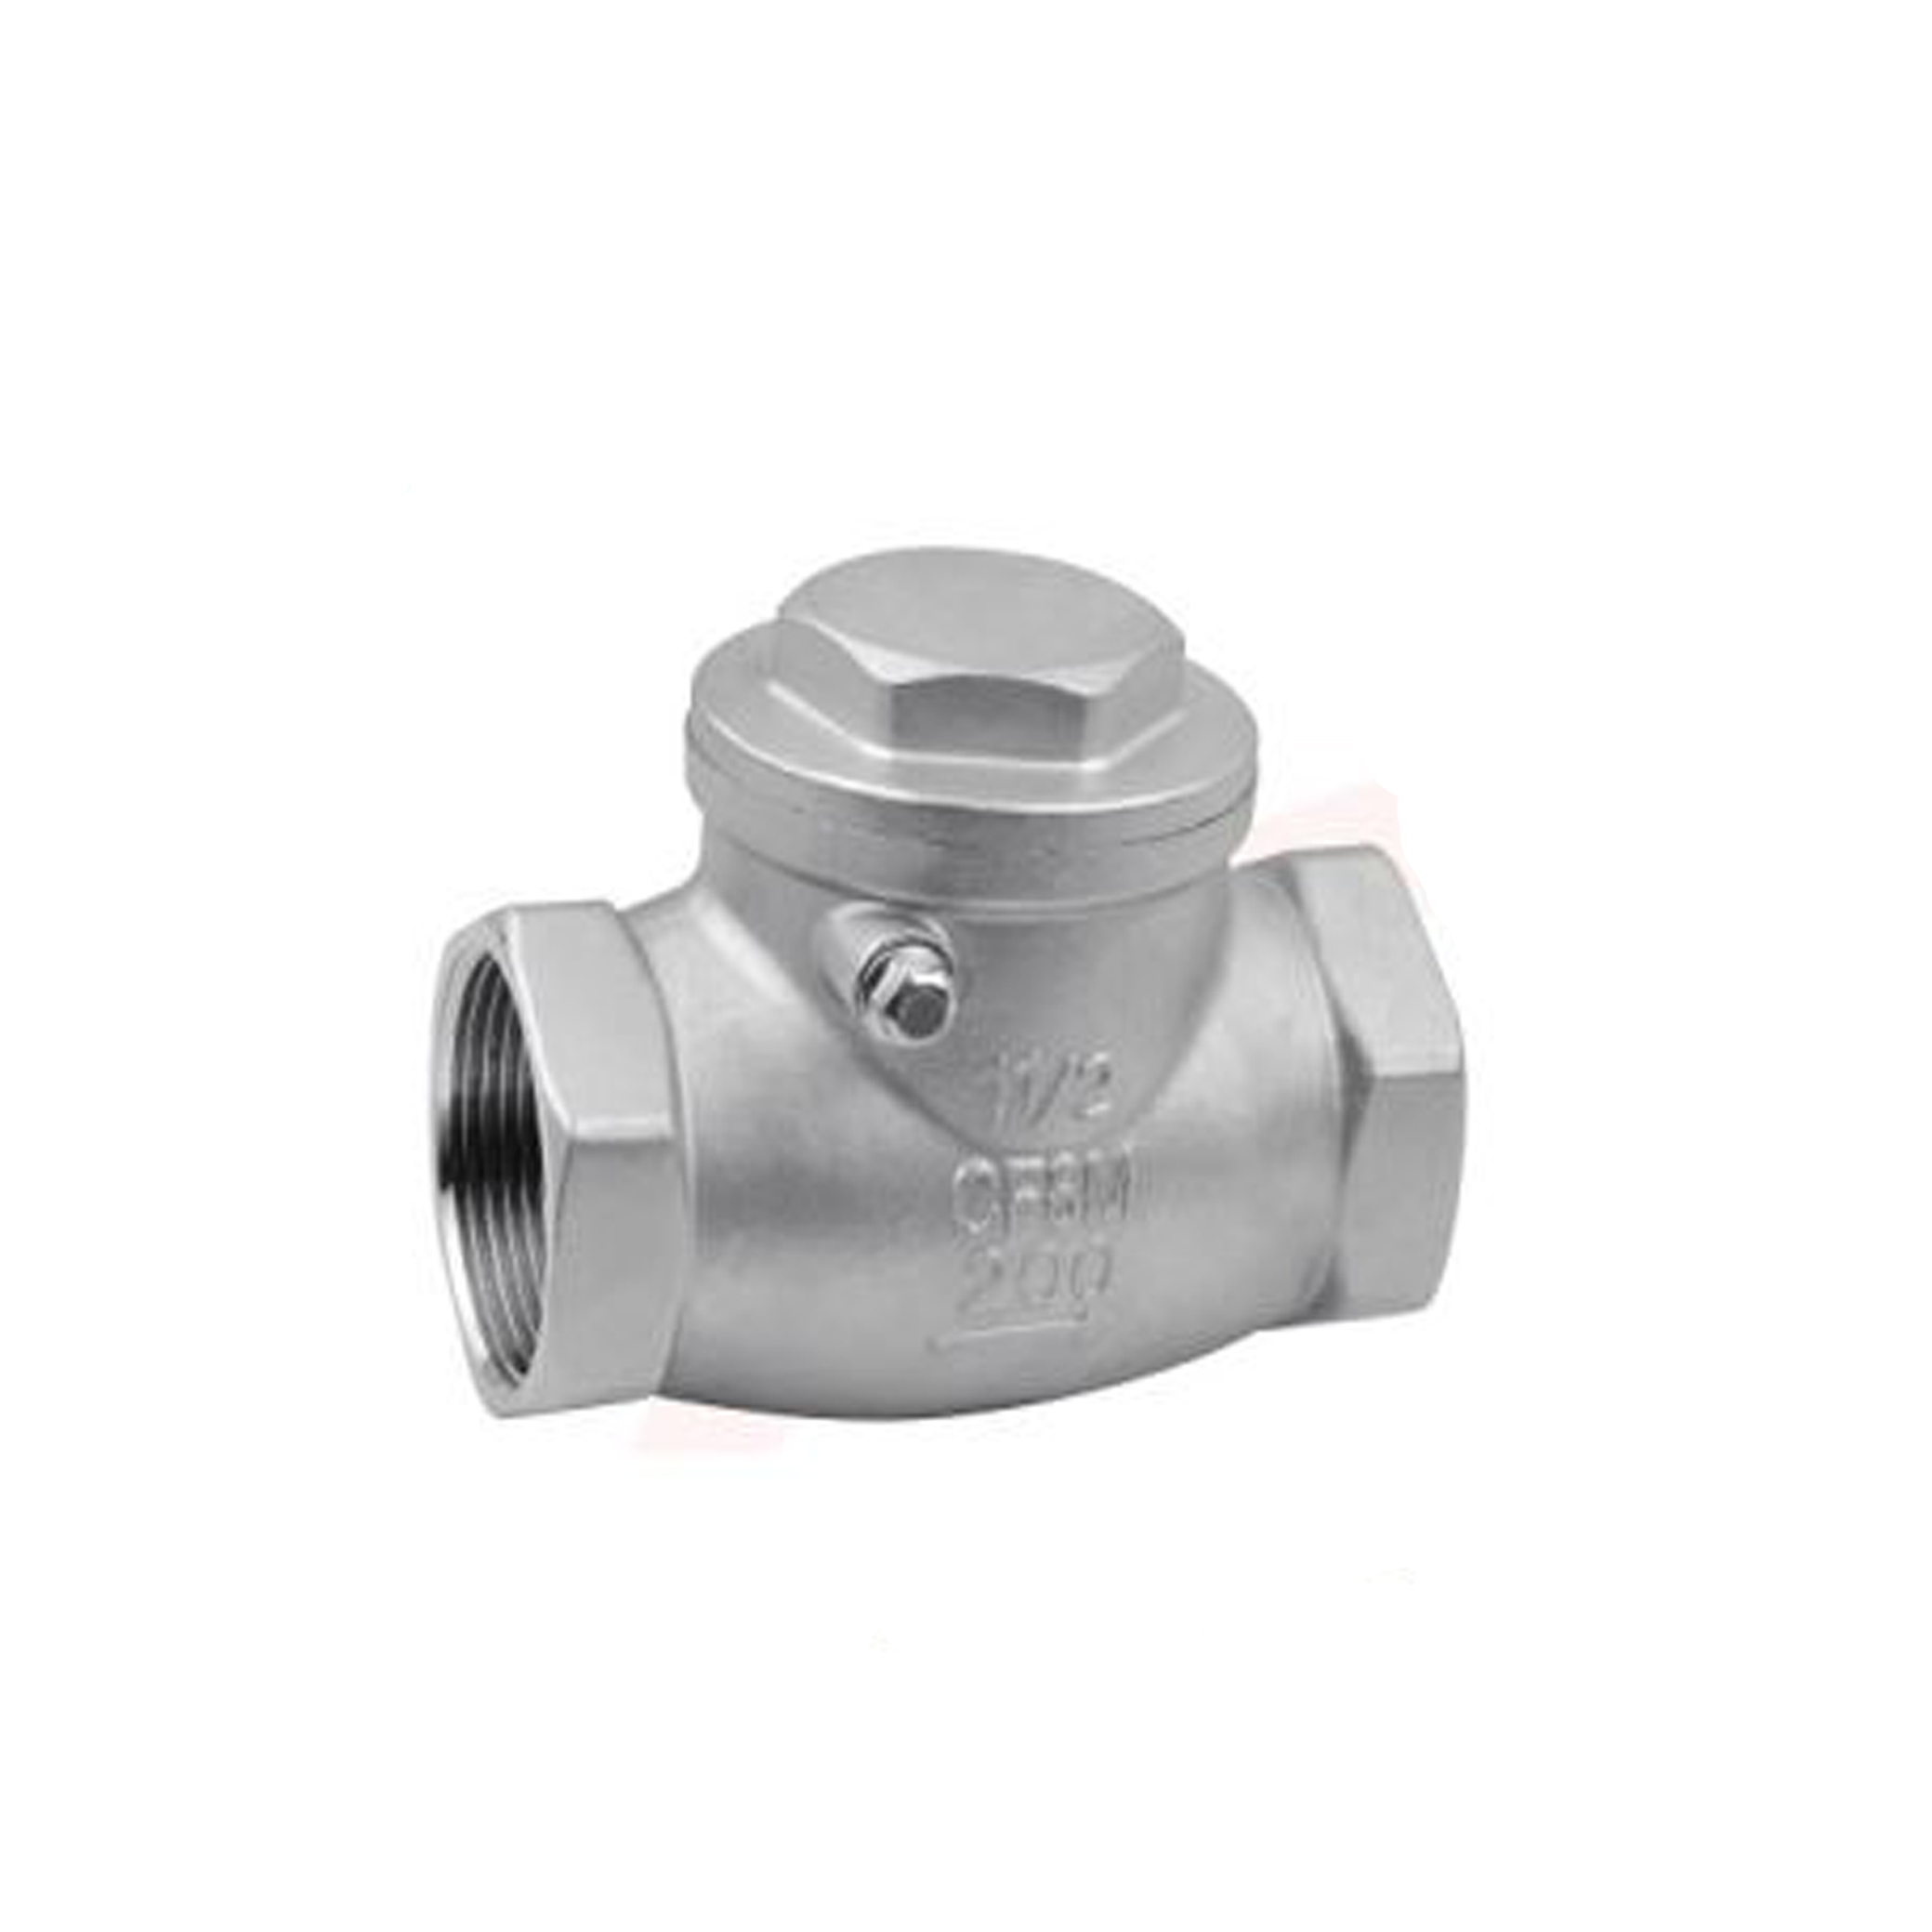 Stainless swing check valve 316 